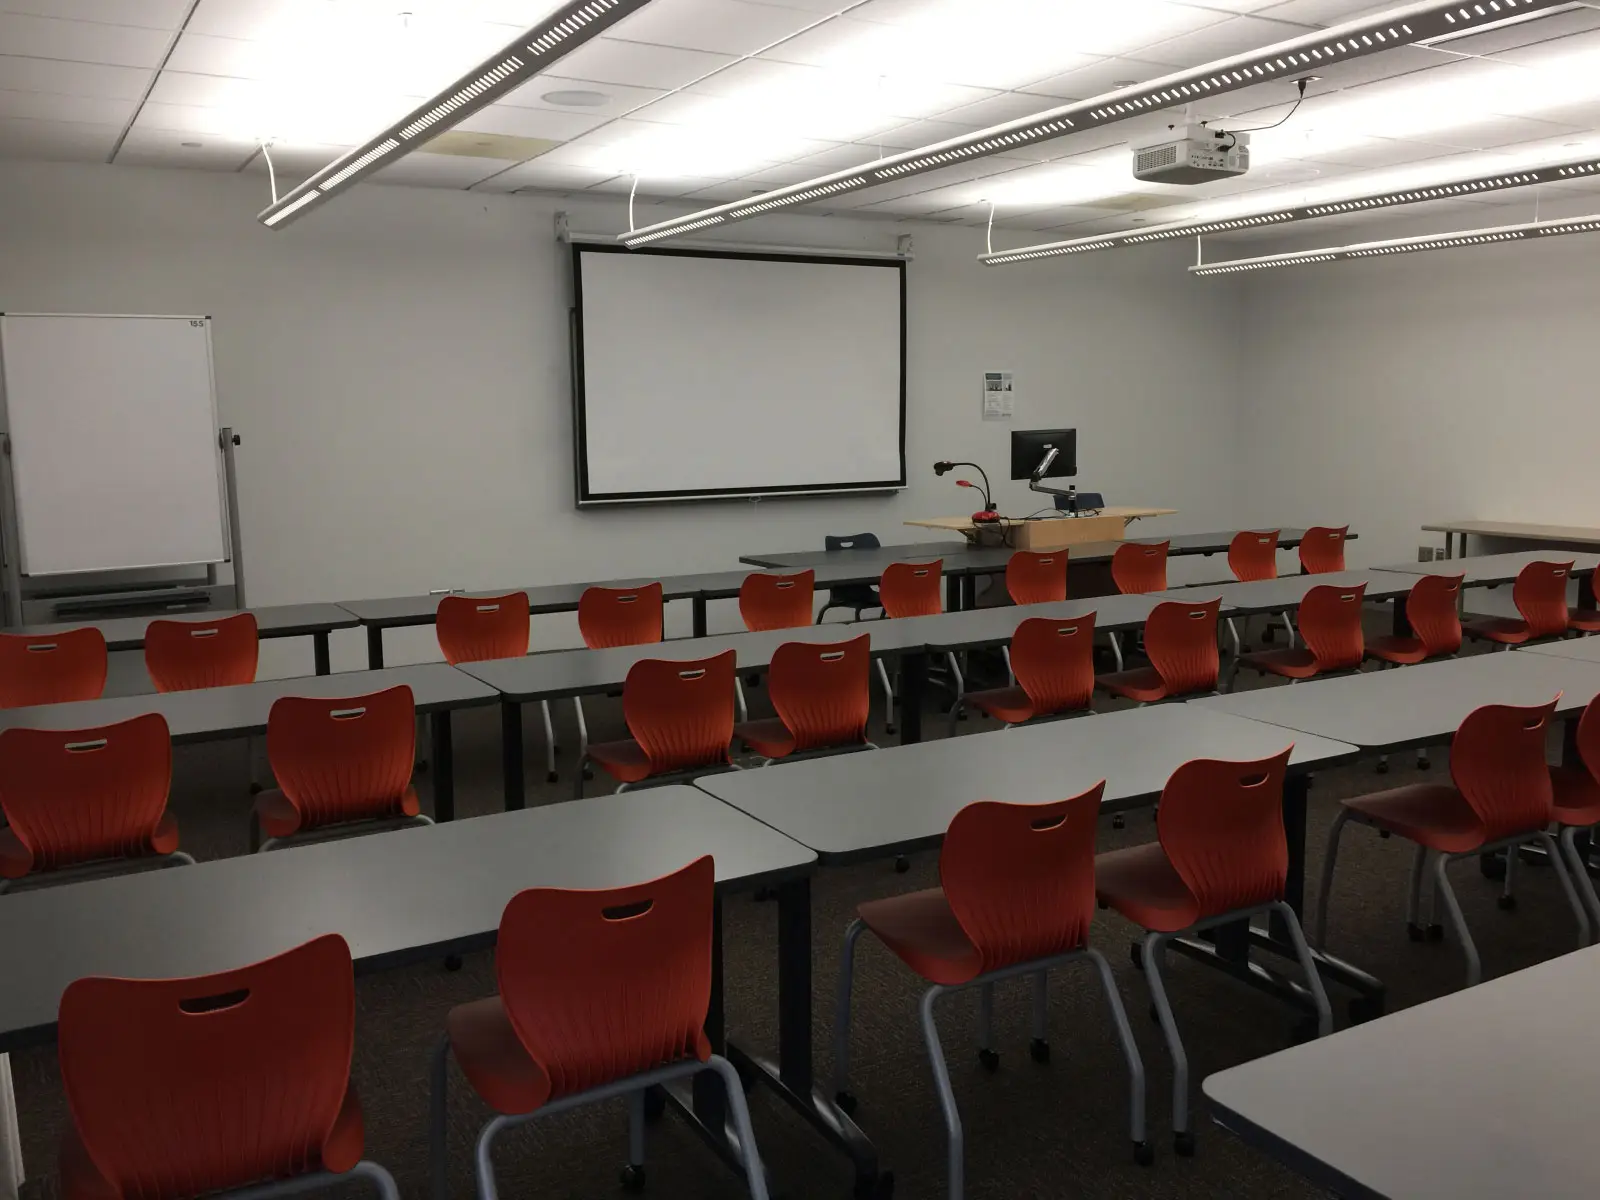 Rows of orange chairs and tables in front of a podium and projector in classroom W155 on the WIlsonville campus